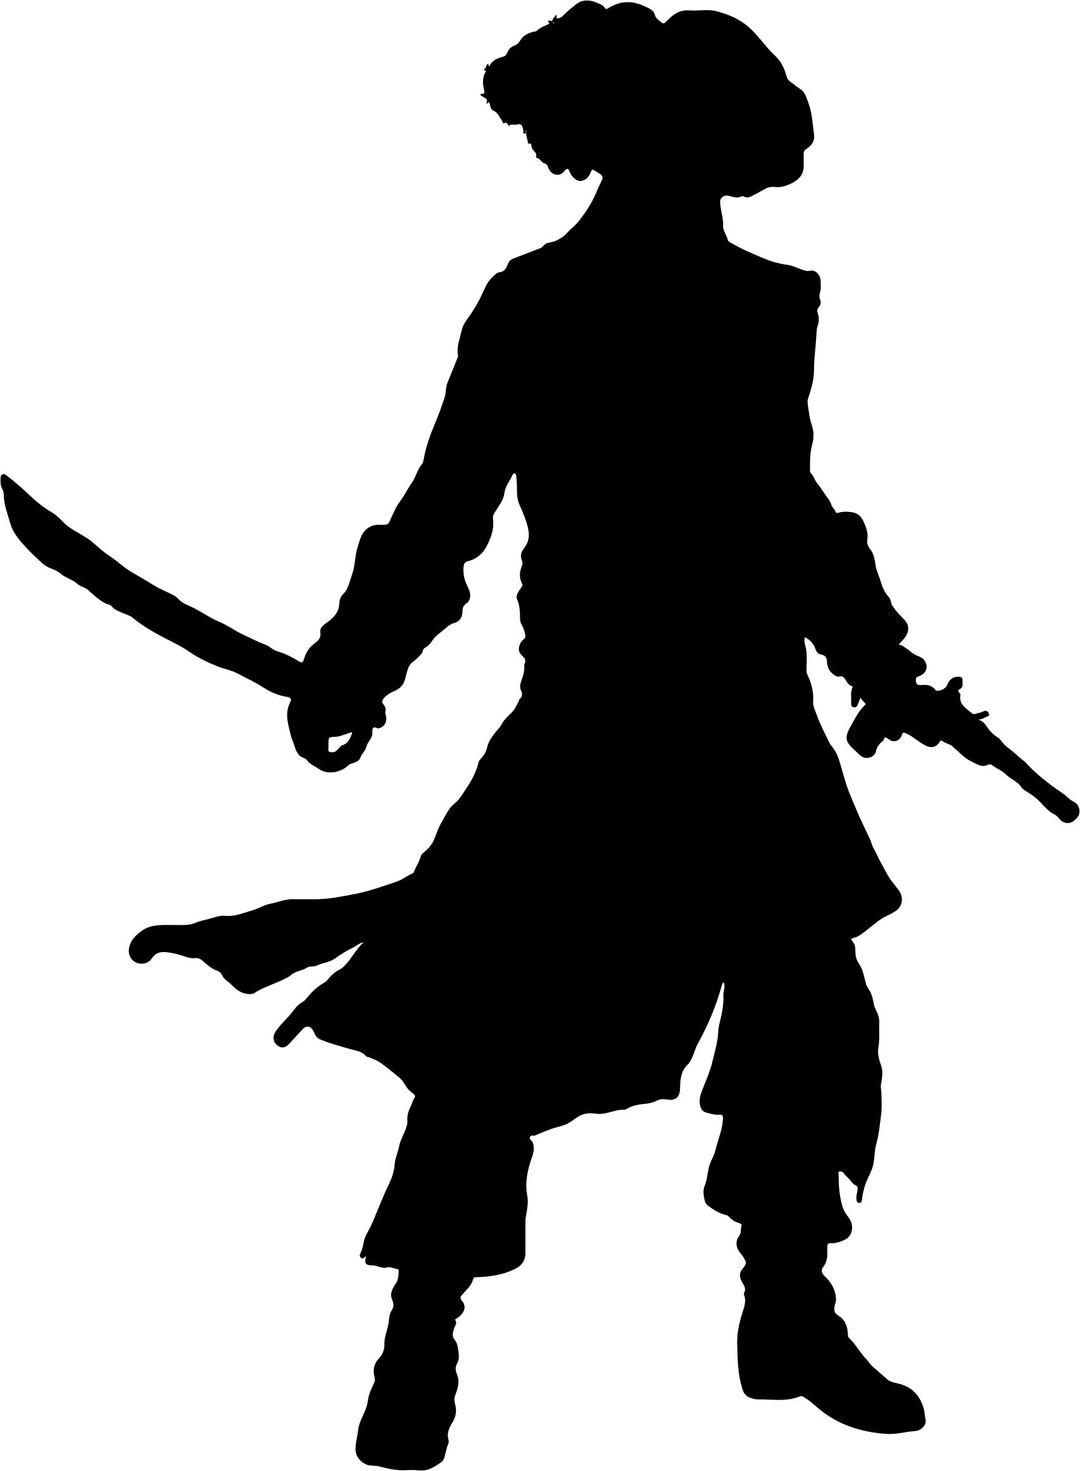 Pirate Silhouette png transparent